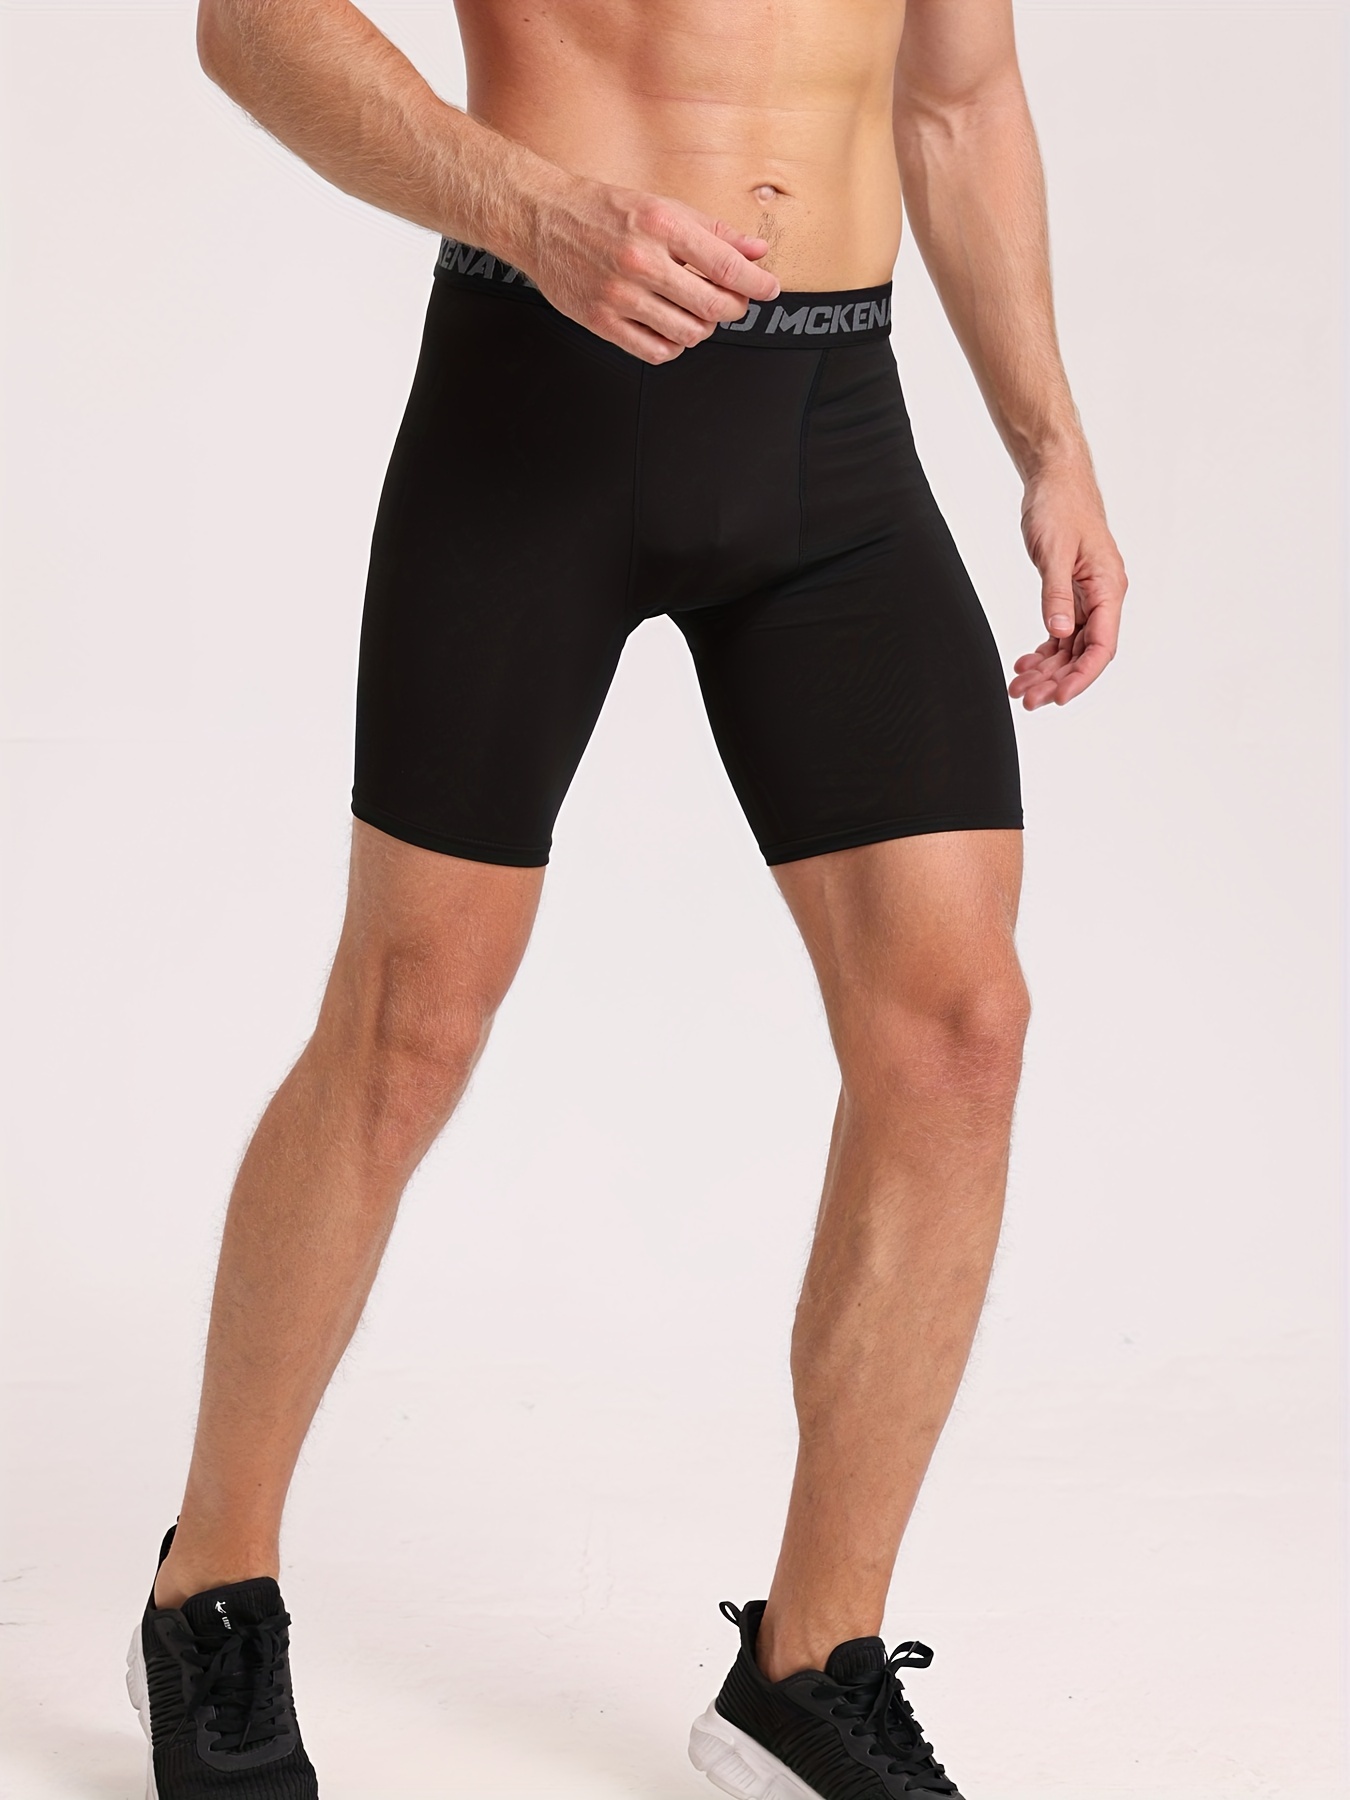 Mens Athletic Tights - Sports Fashion For Men